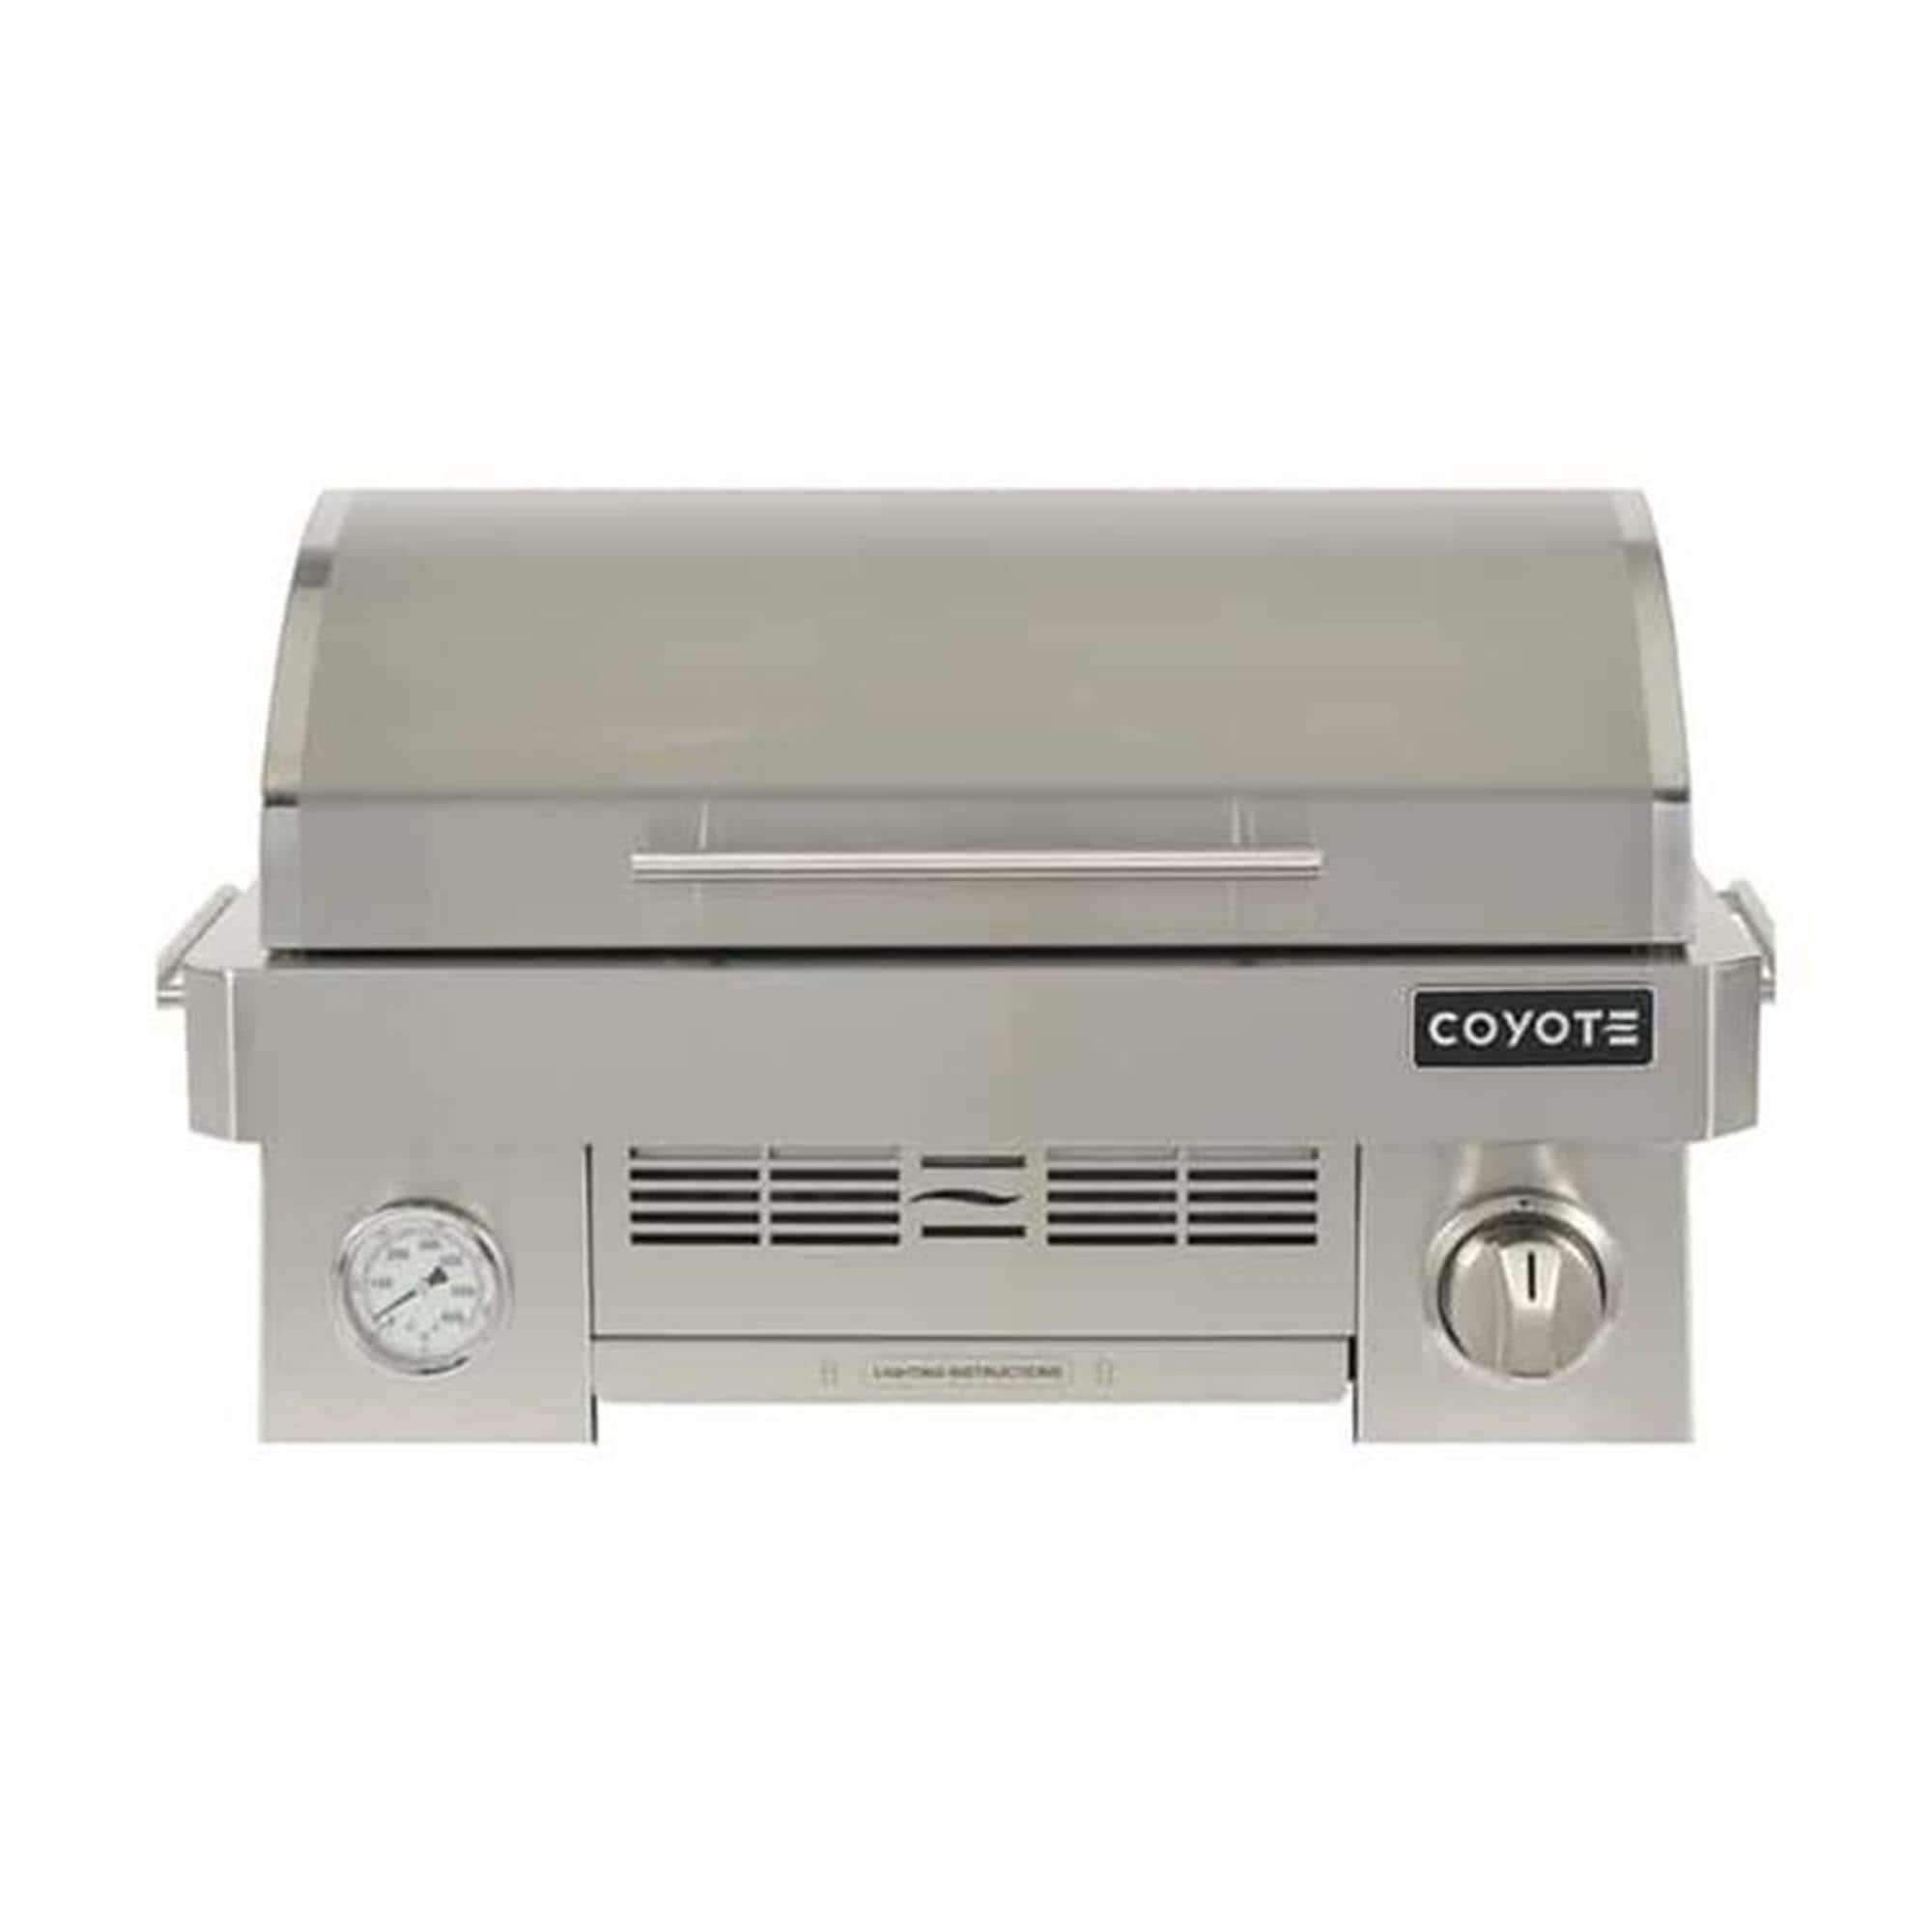 Coyote Portable Grill - Infinity Burner Up To 20k Btu - Lp Gas